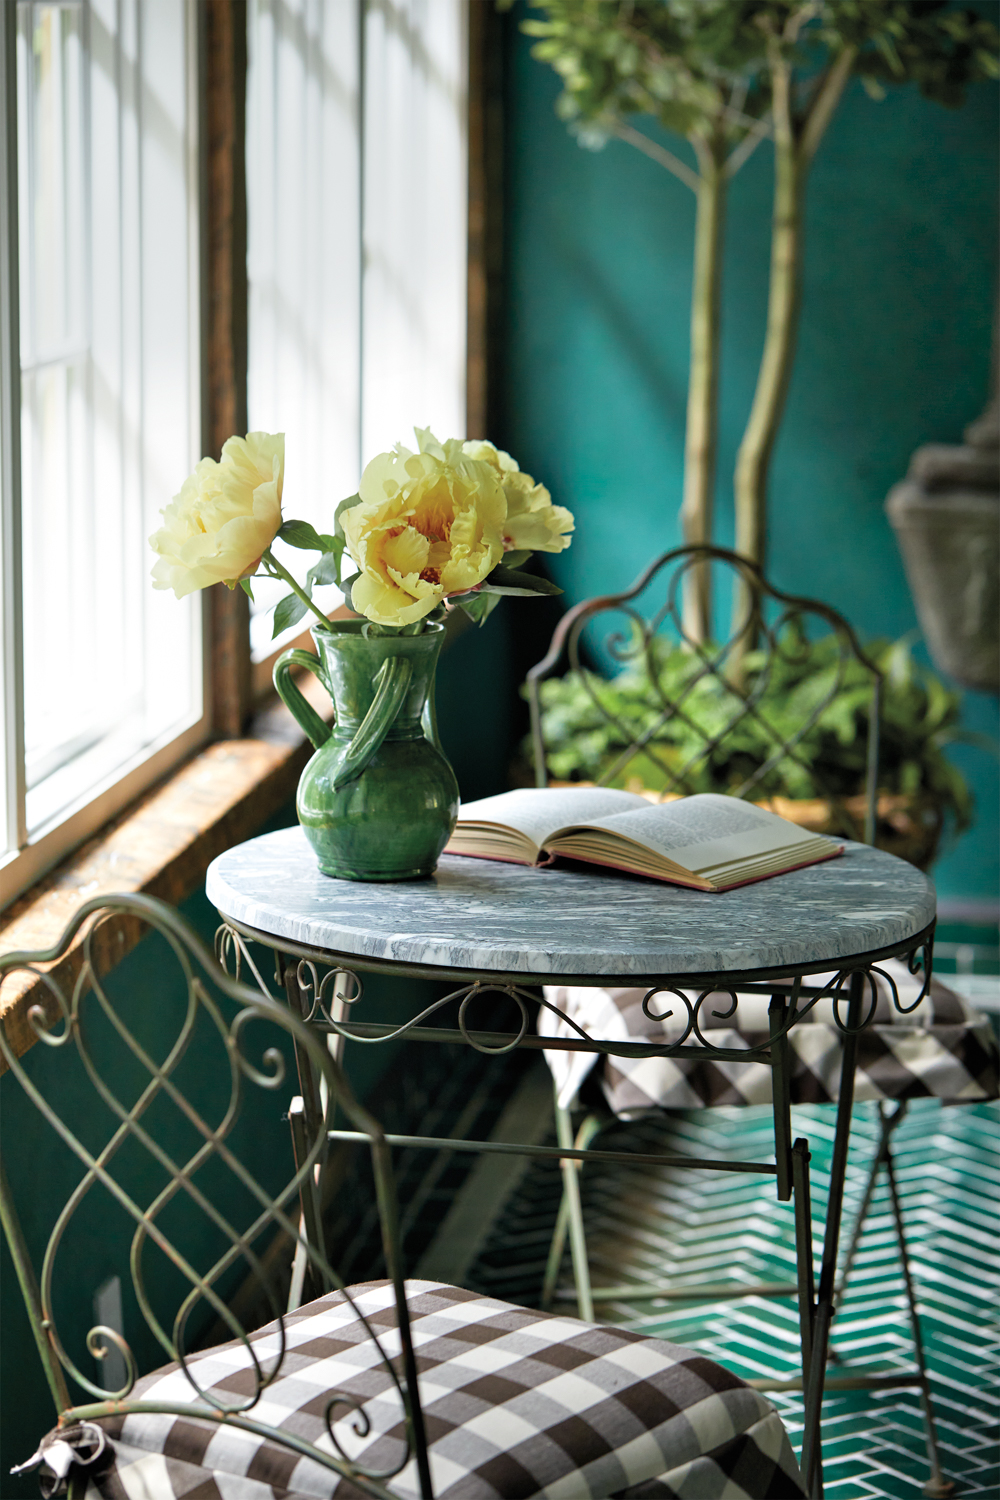 vignette of yellow flowers in a vase in a green garden room